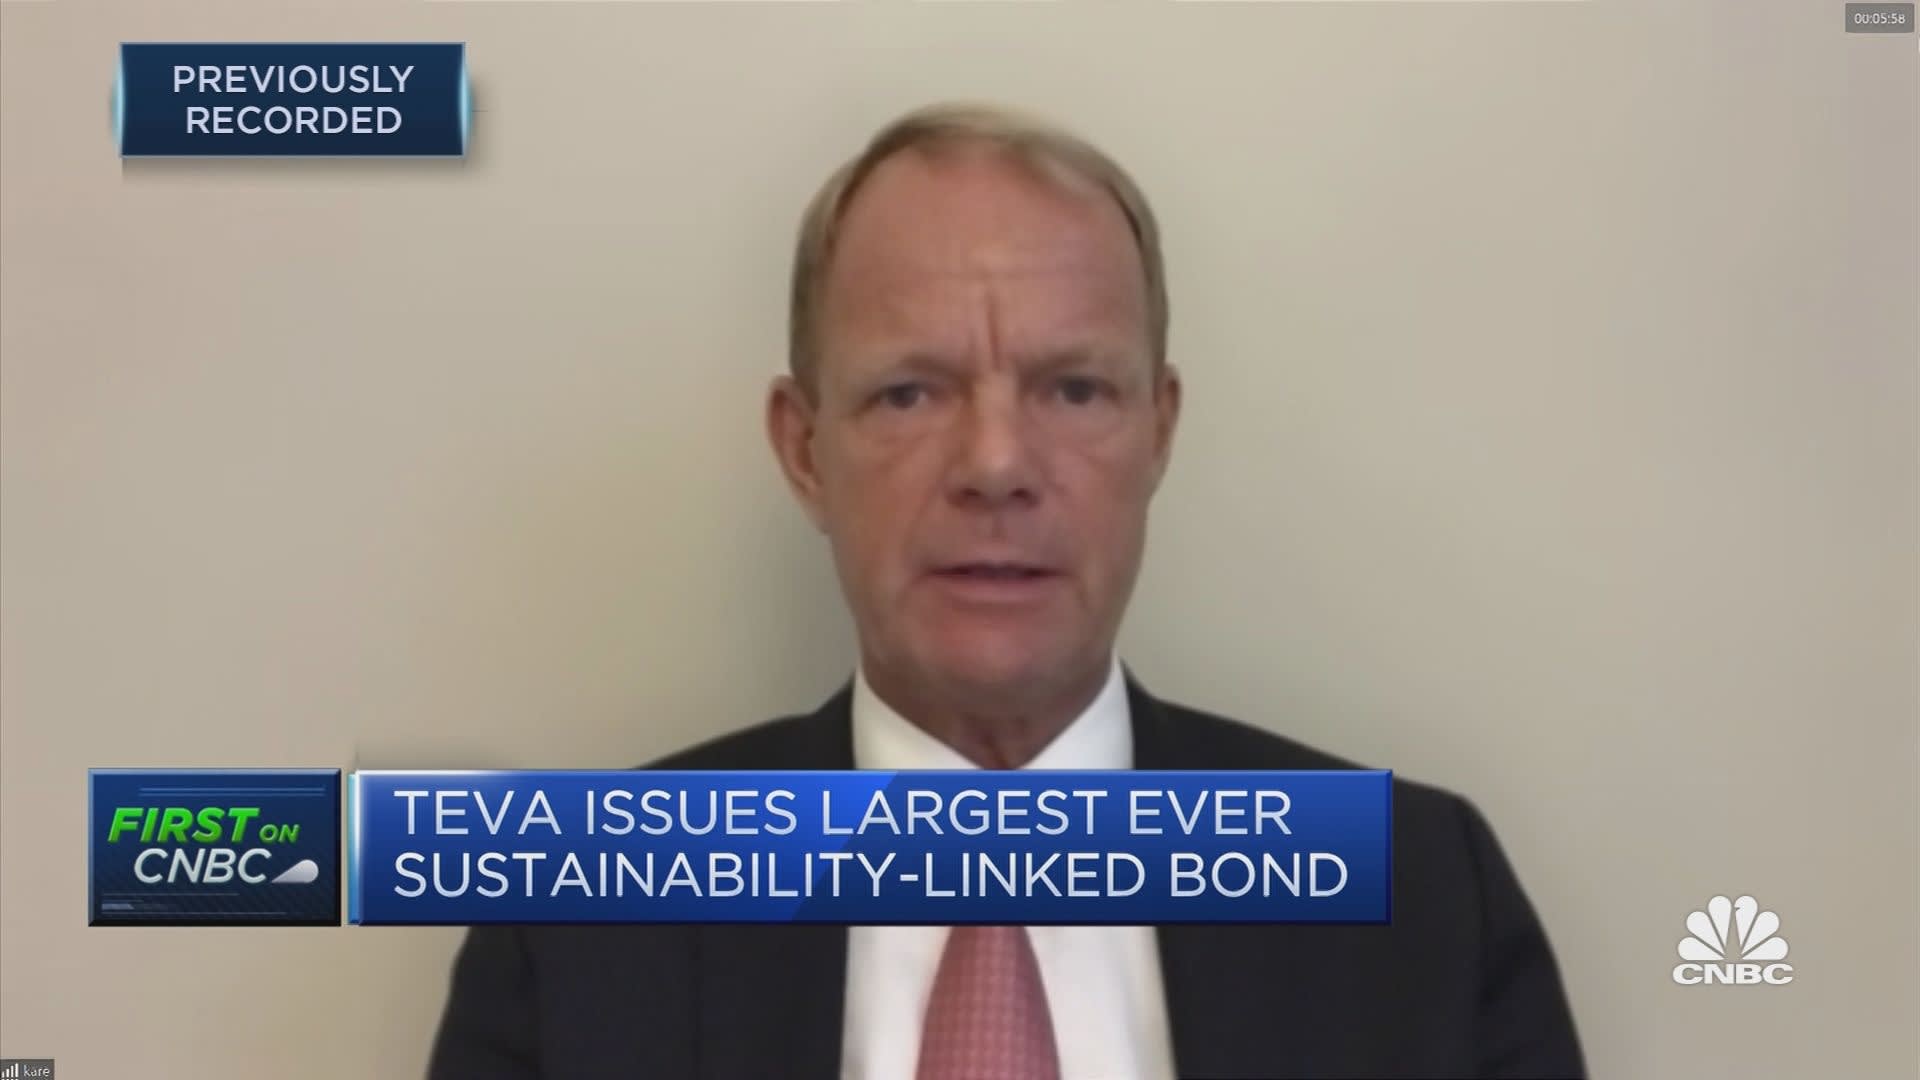 cannot critique for to help,' Teva CEO on sustainability-linked bond launch